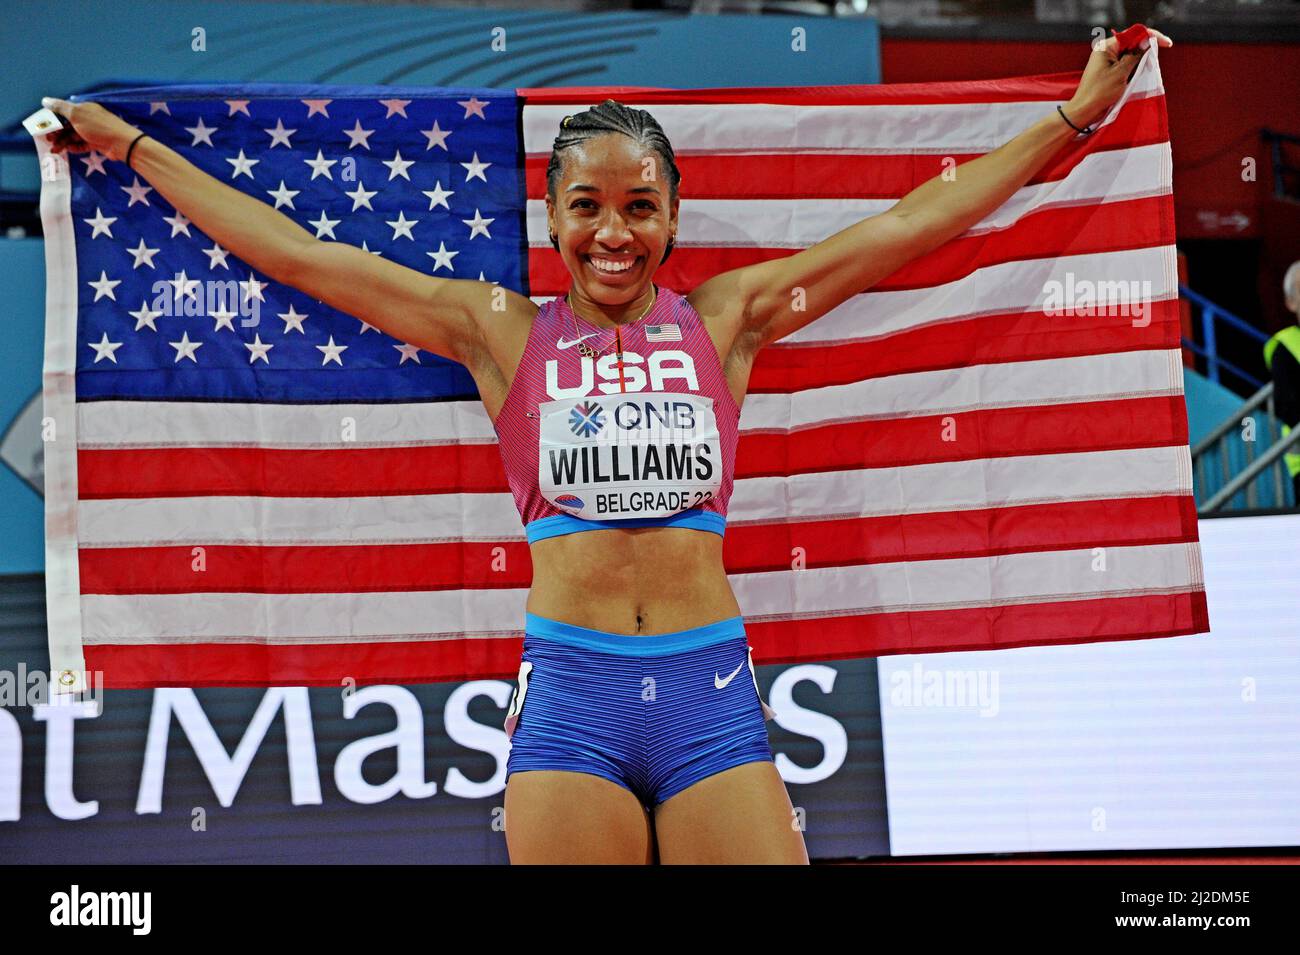 Kendell Williams (USA) poses with United States flag after finishing third in the pentathlon during the World Athletics Indoor Championships, Friday, Stock Photo